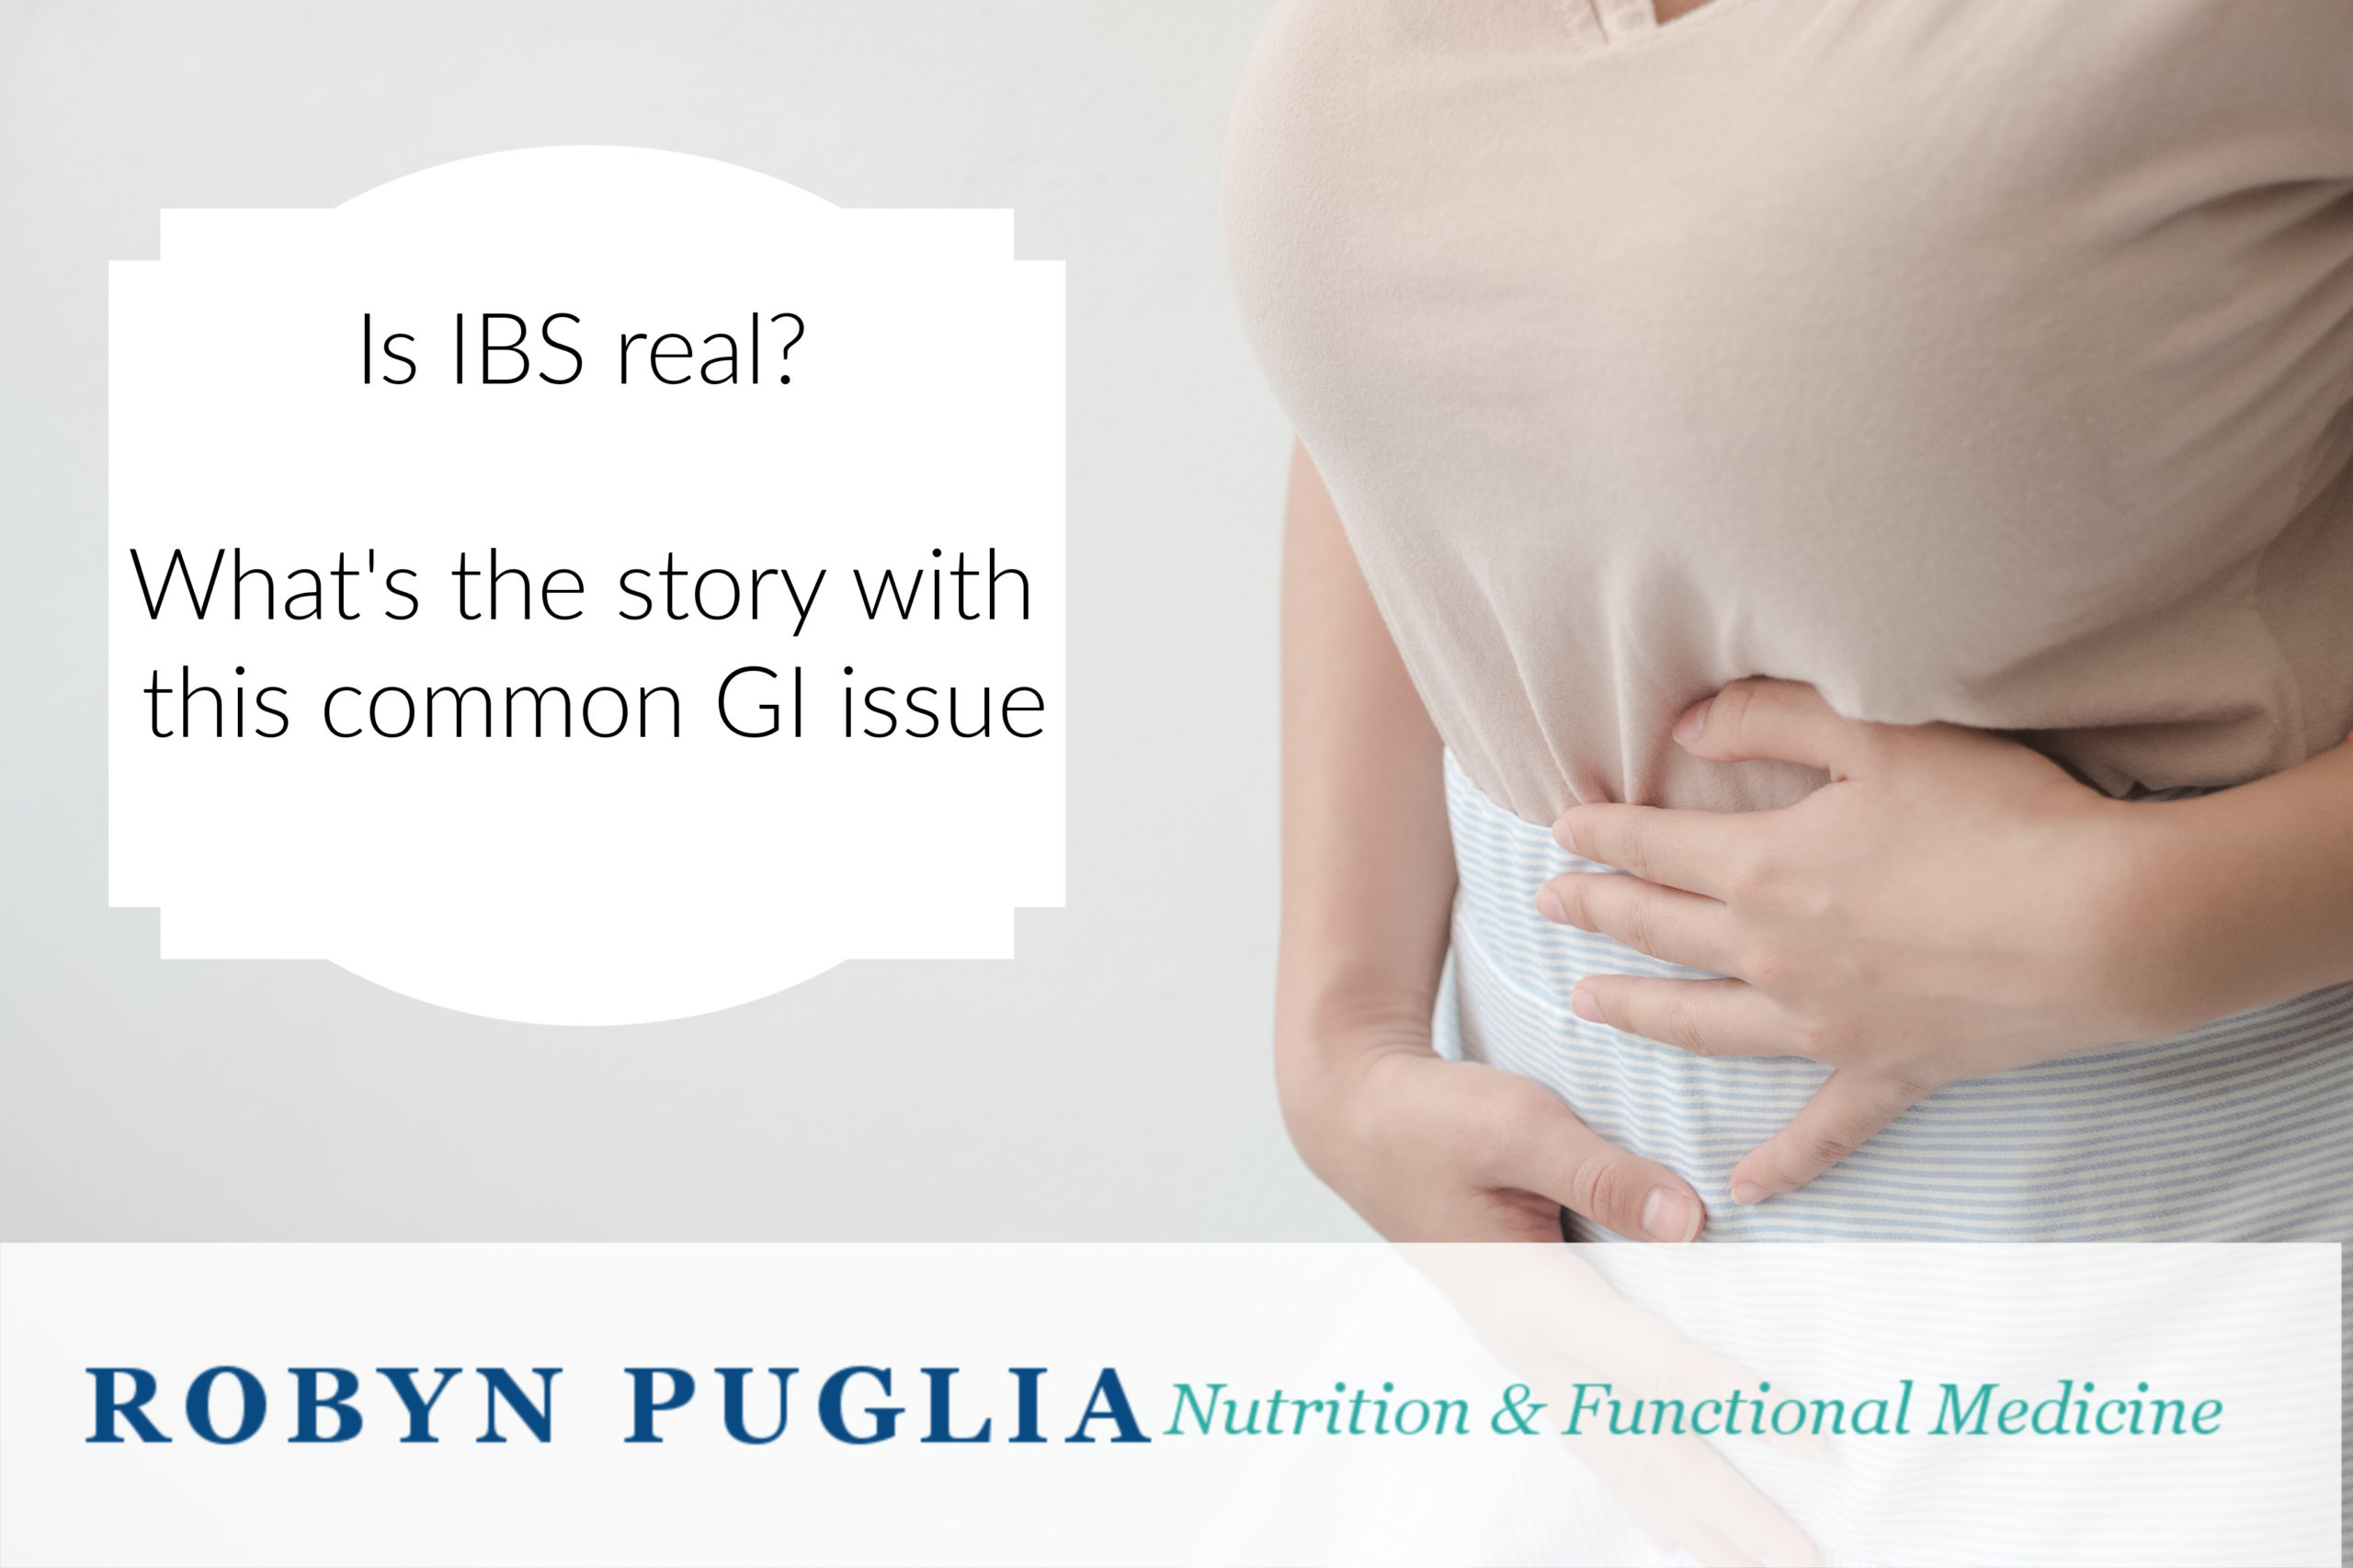 Do You Think Your IBS Diagnosis Is Real?